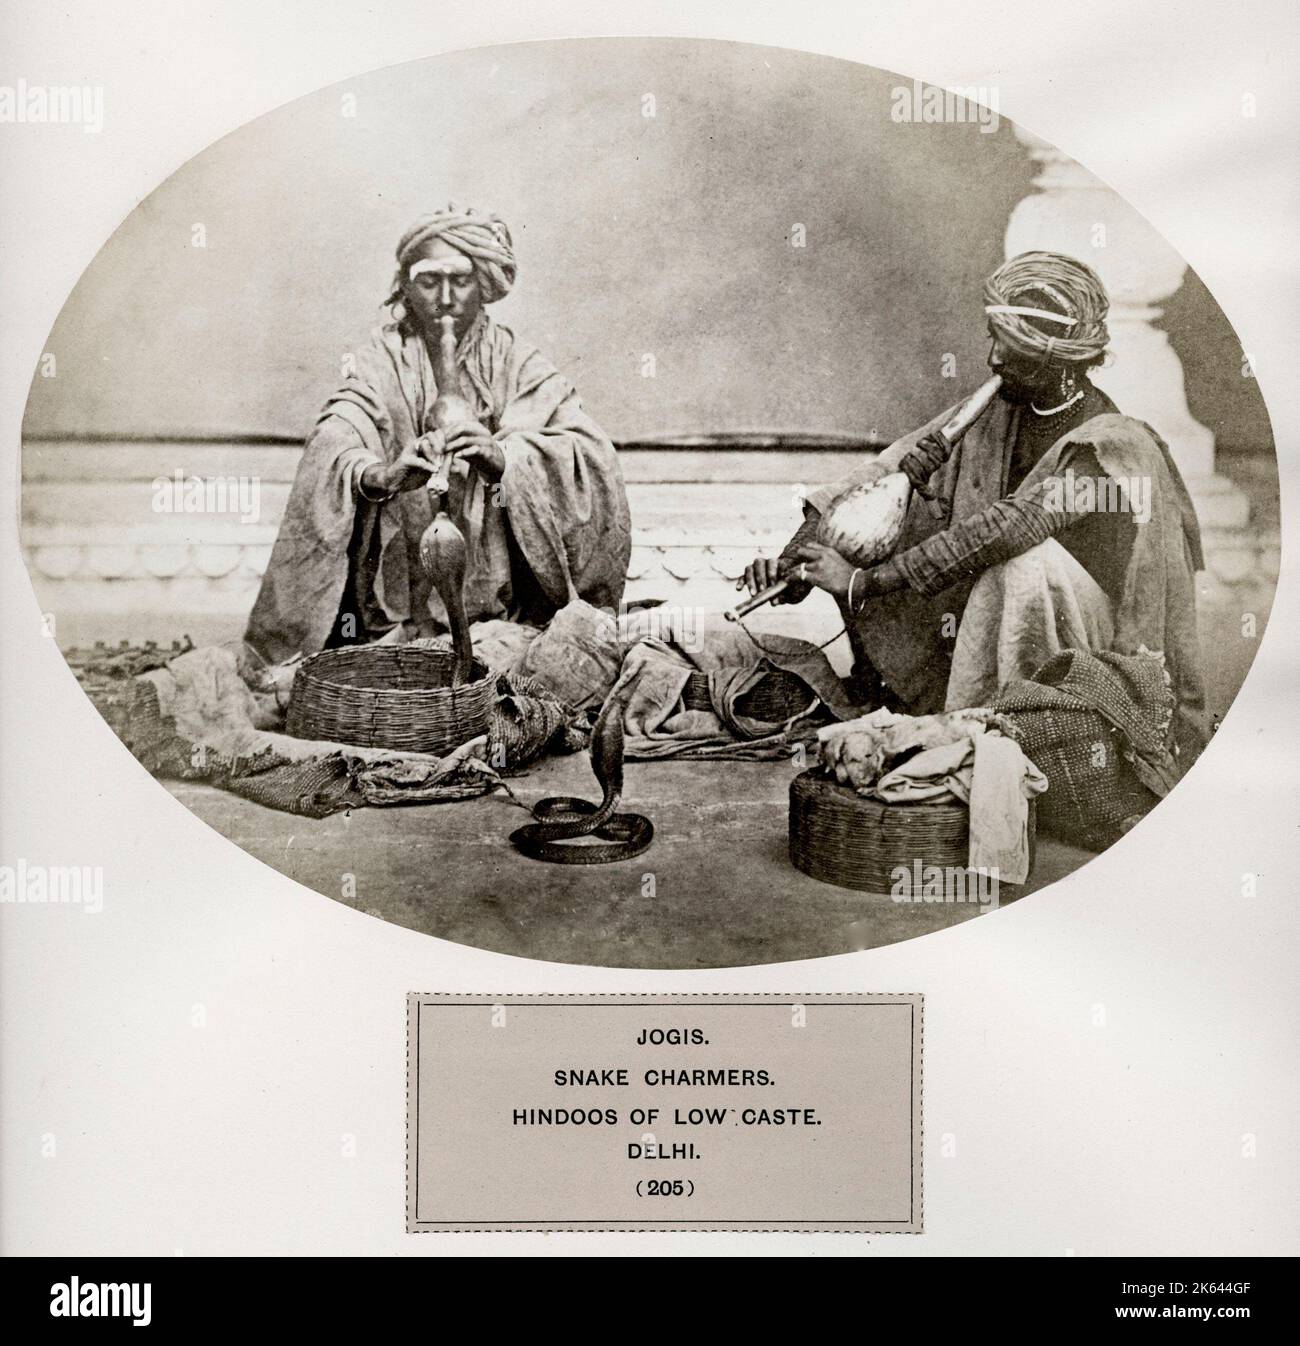 The People of India: A Series of Photographic Illustrations, with Descriptive Letterpress, of the Races and Tribes of Hindustan - published in the 1860s under order of the Viceroy, Lord Canning - Jogis, snake charmers, Hindoos of low caste, Delhi. Hindu. Stock Photo